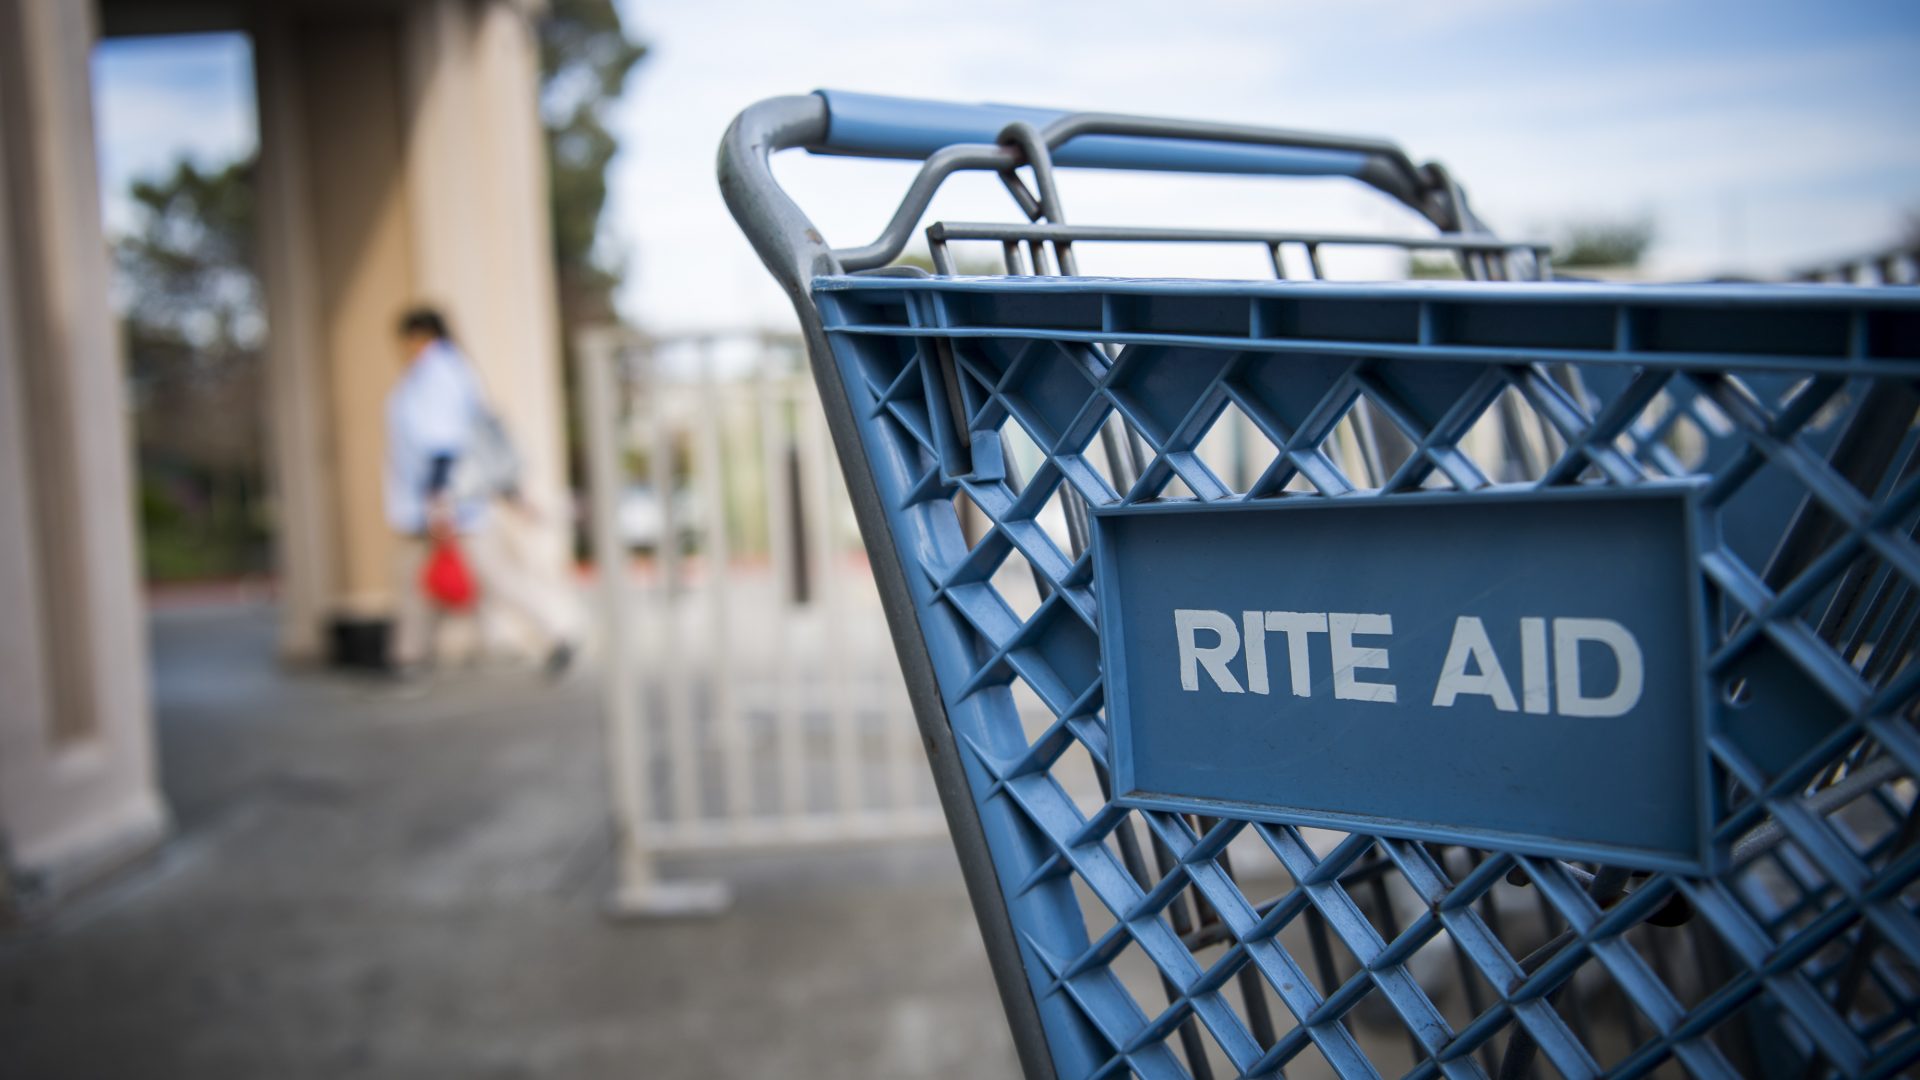 Signage is displayed on a shopping cart outside a Rite Aid Corp. store in Hercules, California, U.S., on Tuesday, Jan. 2, 2018. Rite Aid Corp. is expected to release earnings figures on Jan 3. Photographer: David Paul Morris/Bloomberg via Getty Images